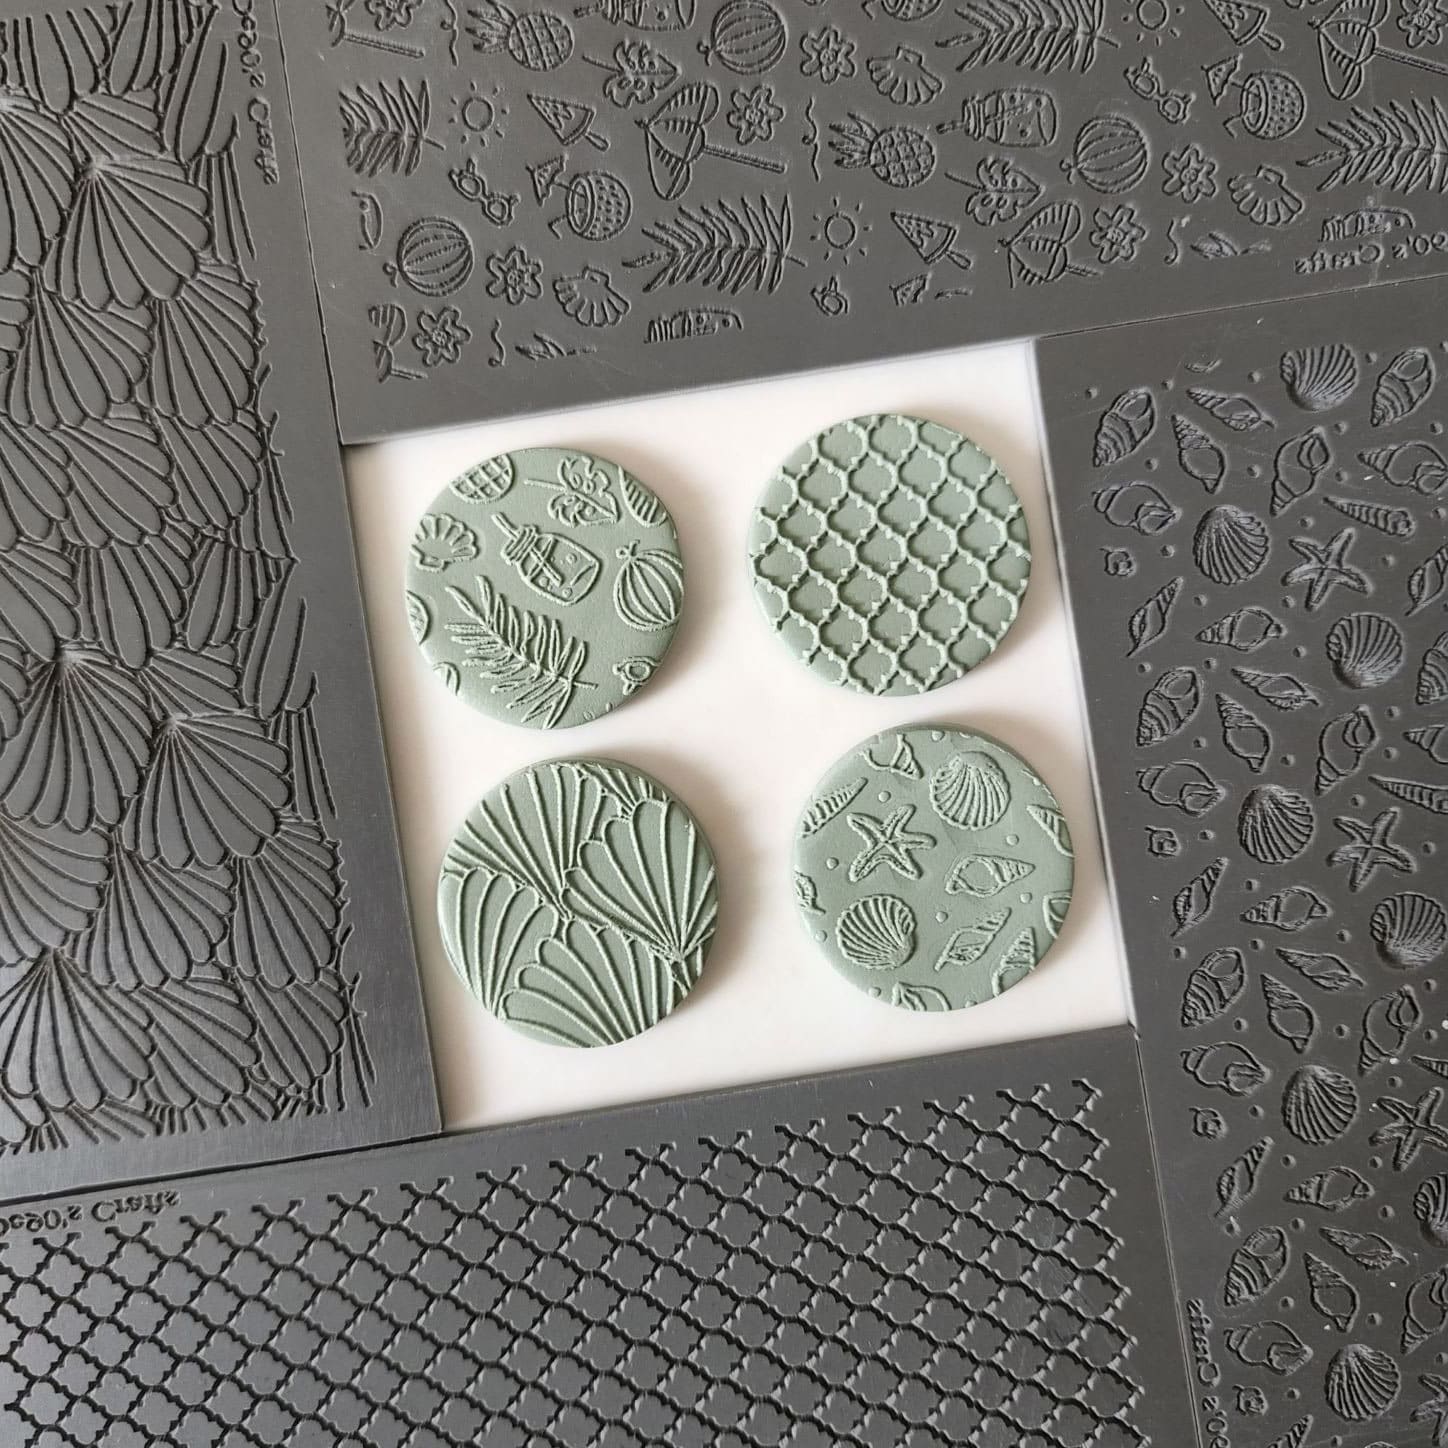 KEOKER Polymer Clay Texture Sheets Set, Clay Earring Molds for